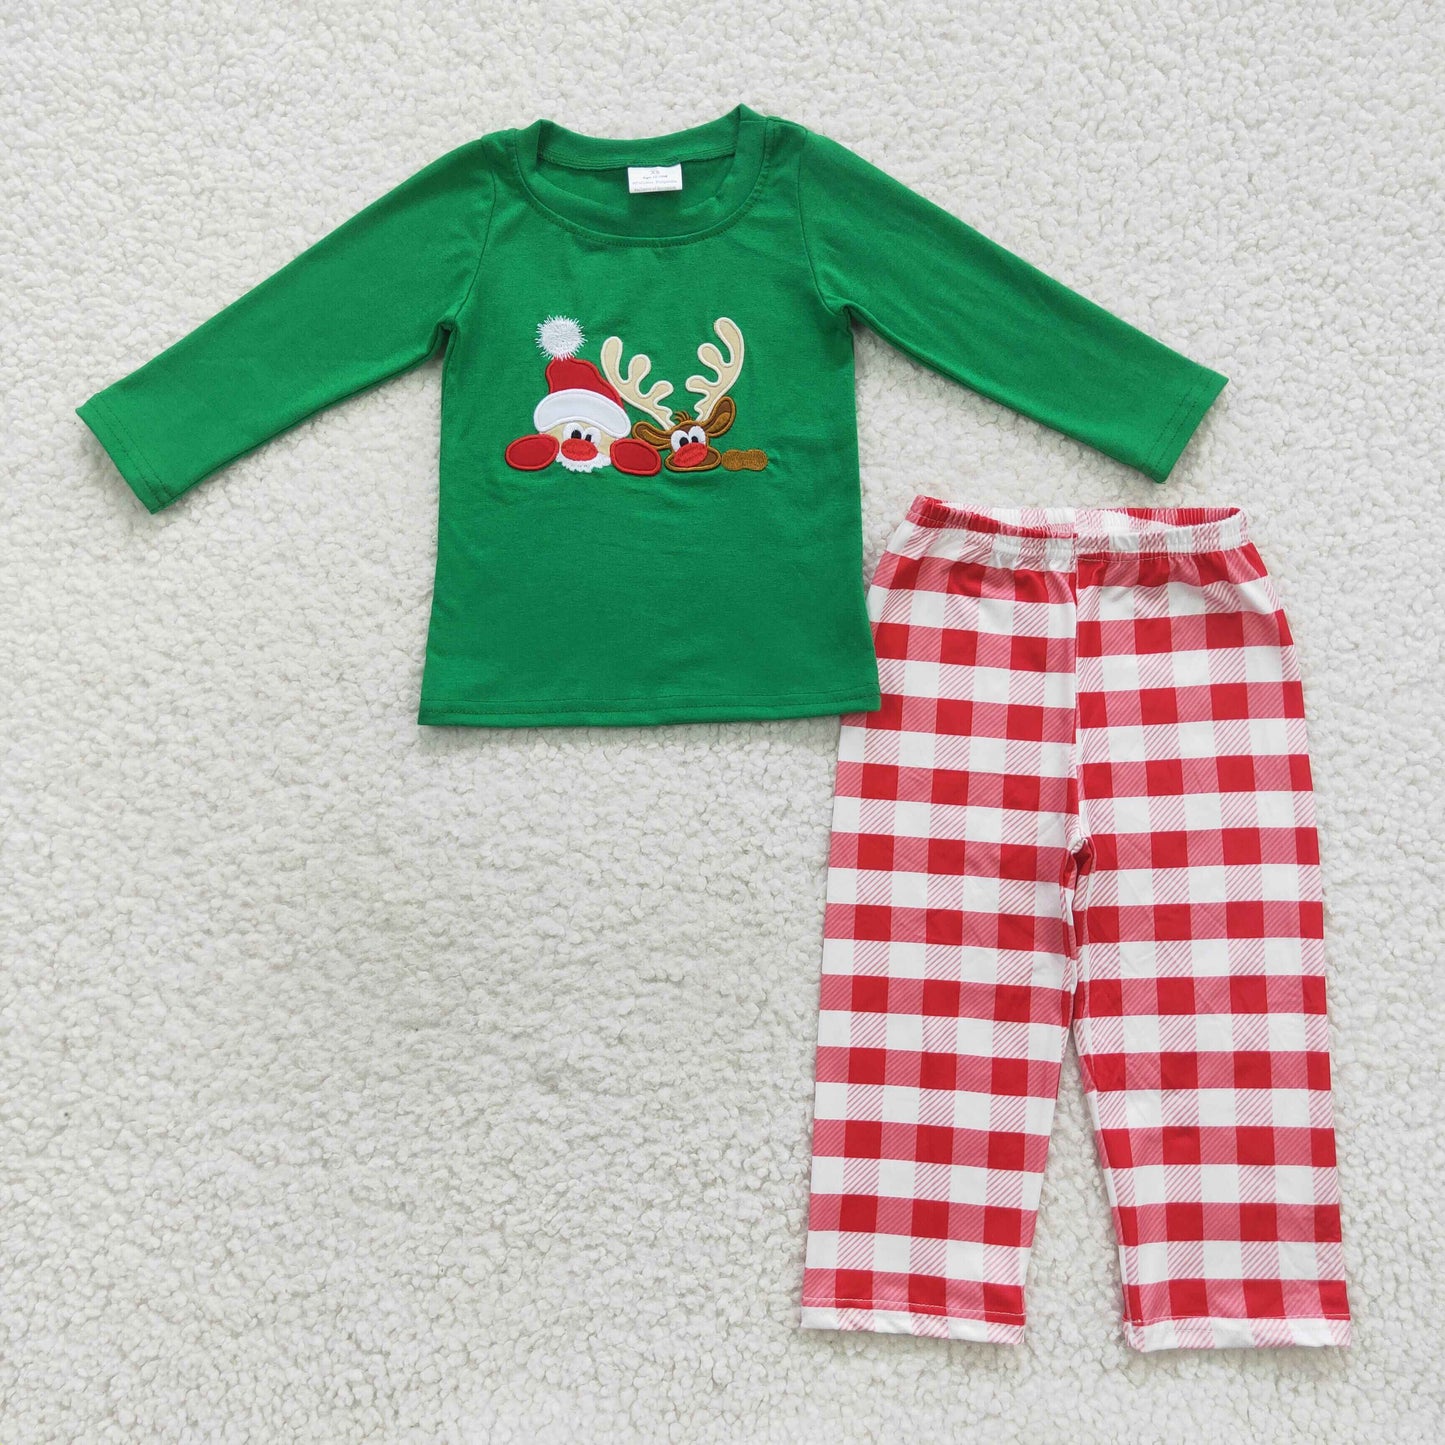 boy’s christmas green moose embroidery outfit plaide pants set